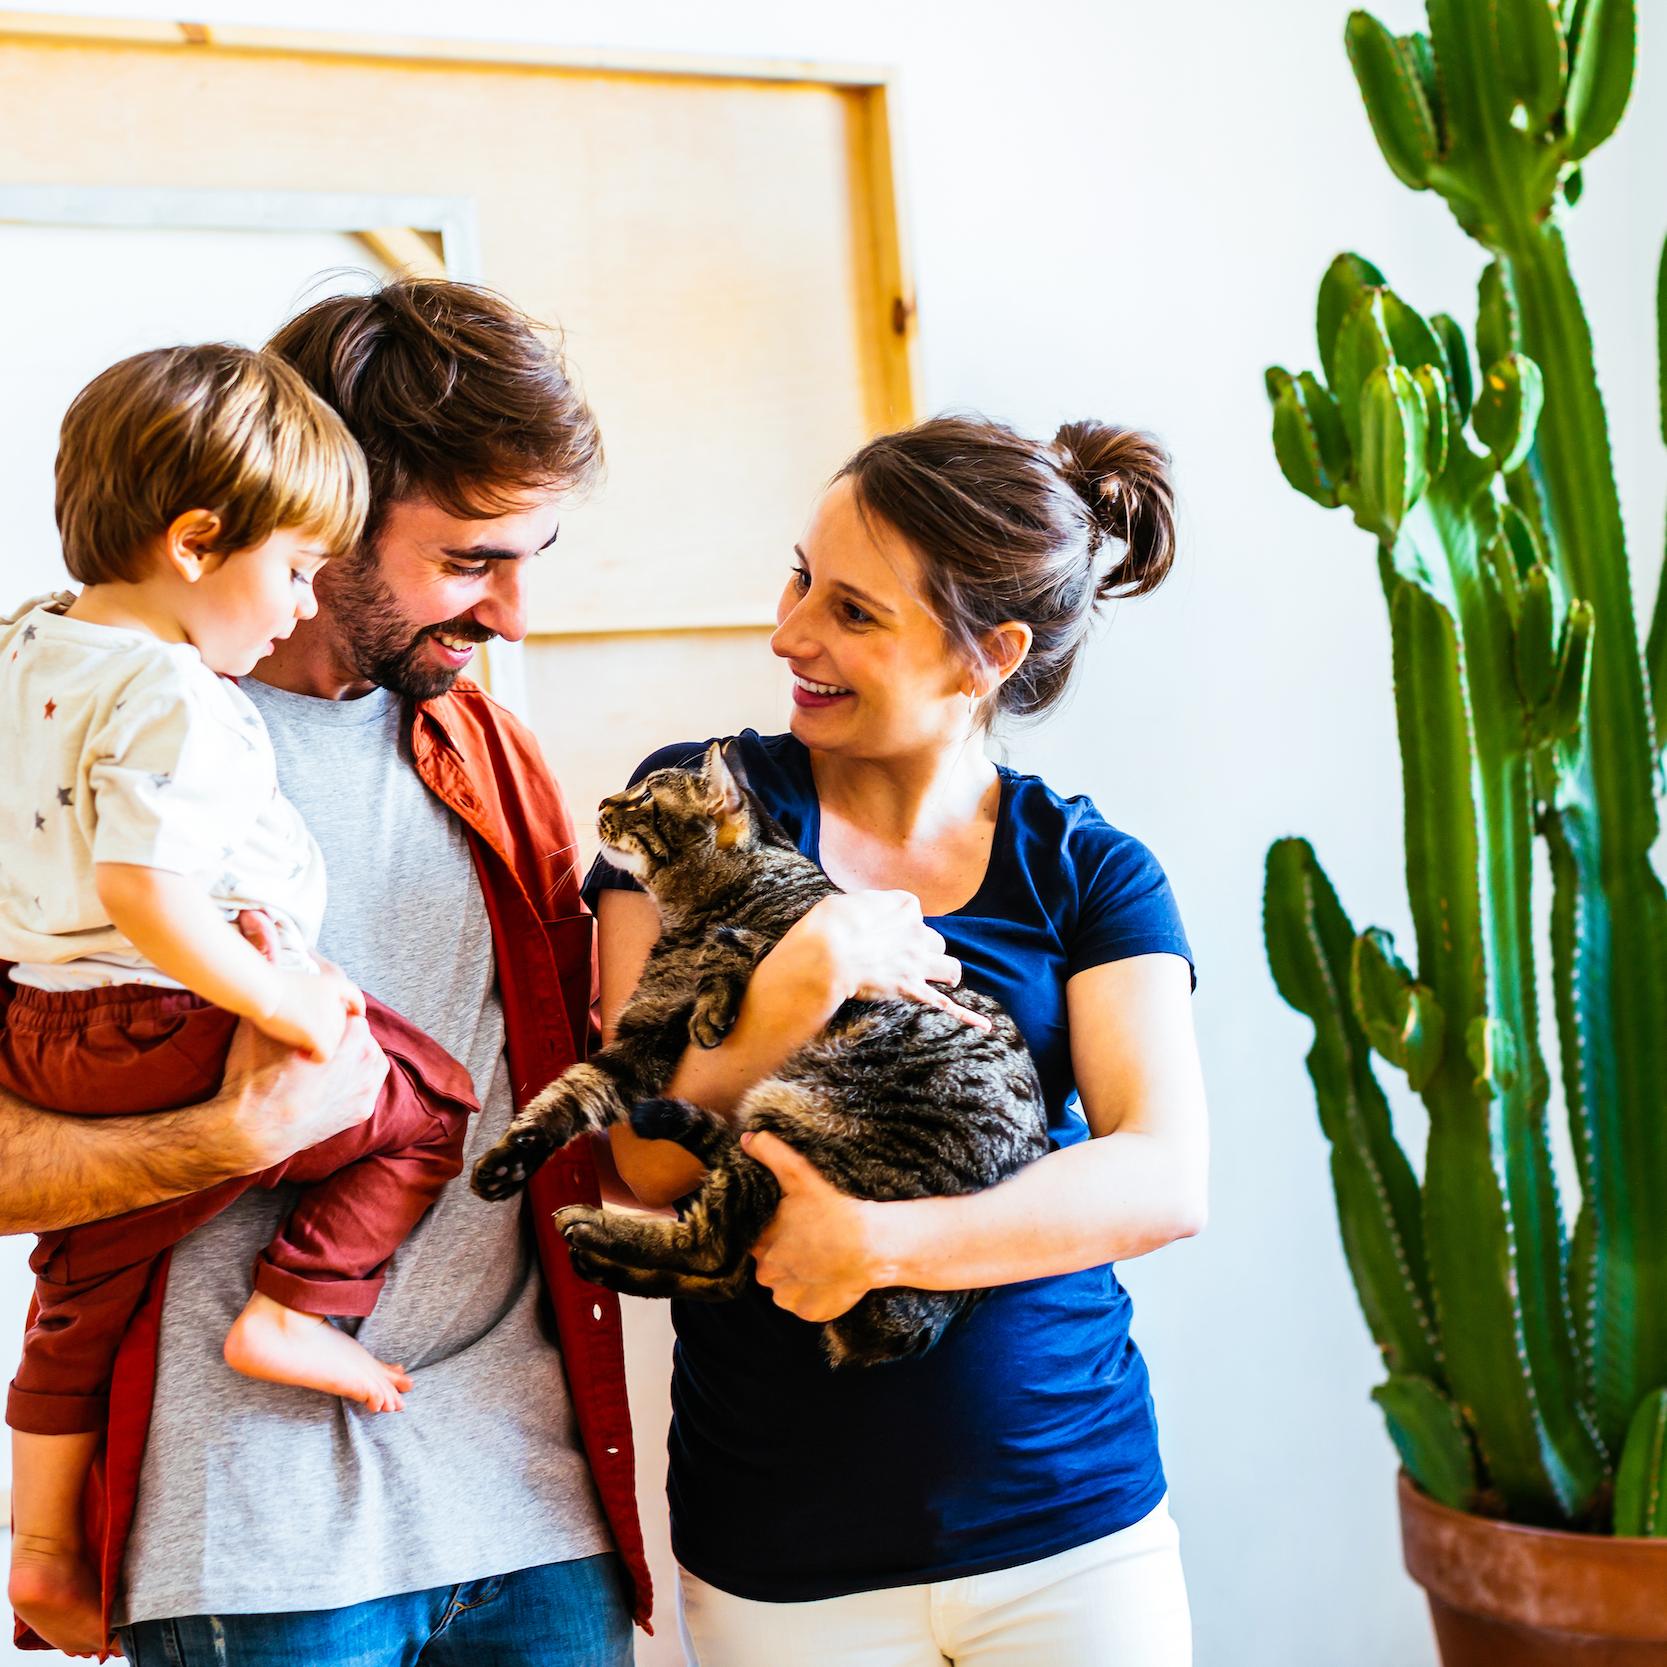 Smiling parents with child and a cat, standing next to a cactus